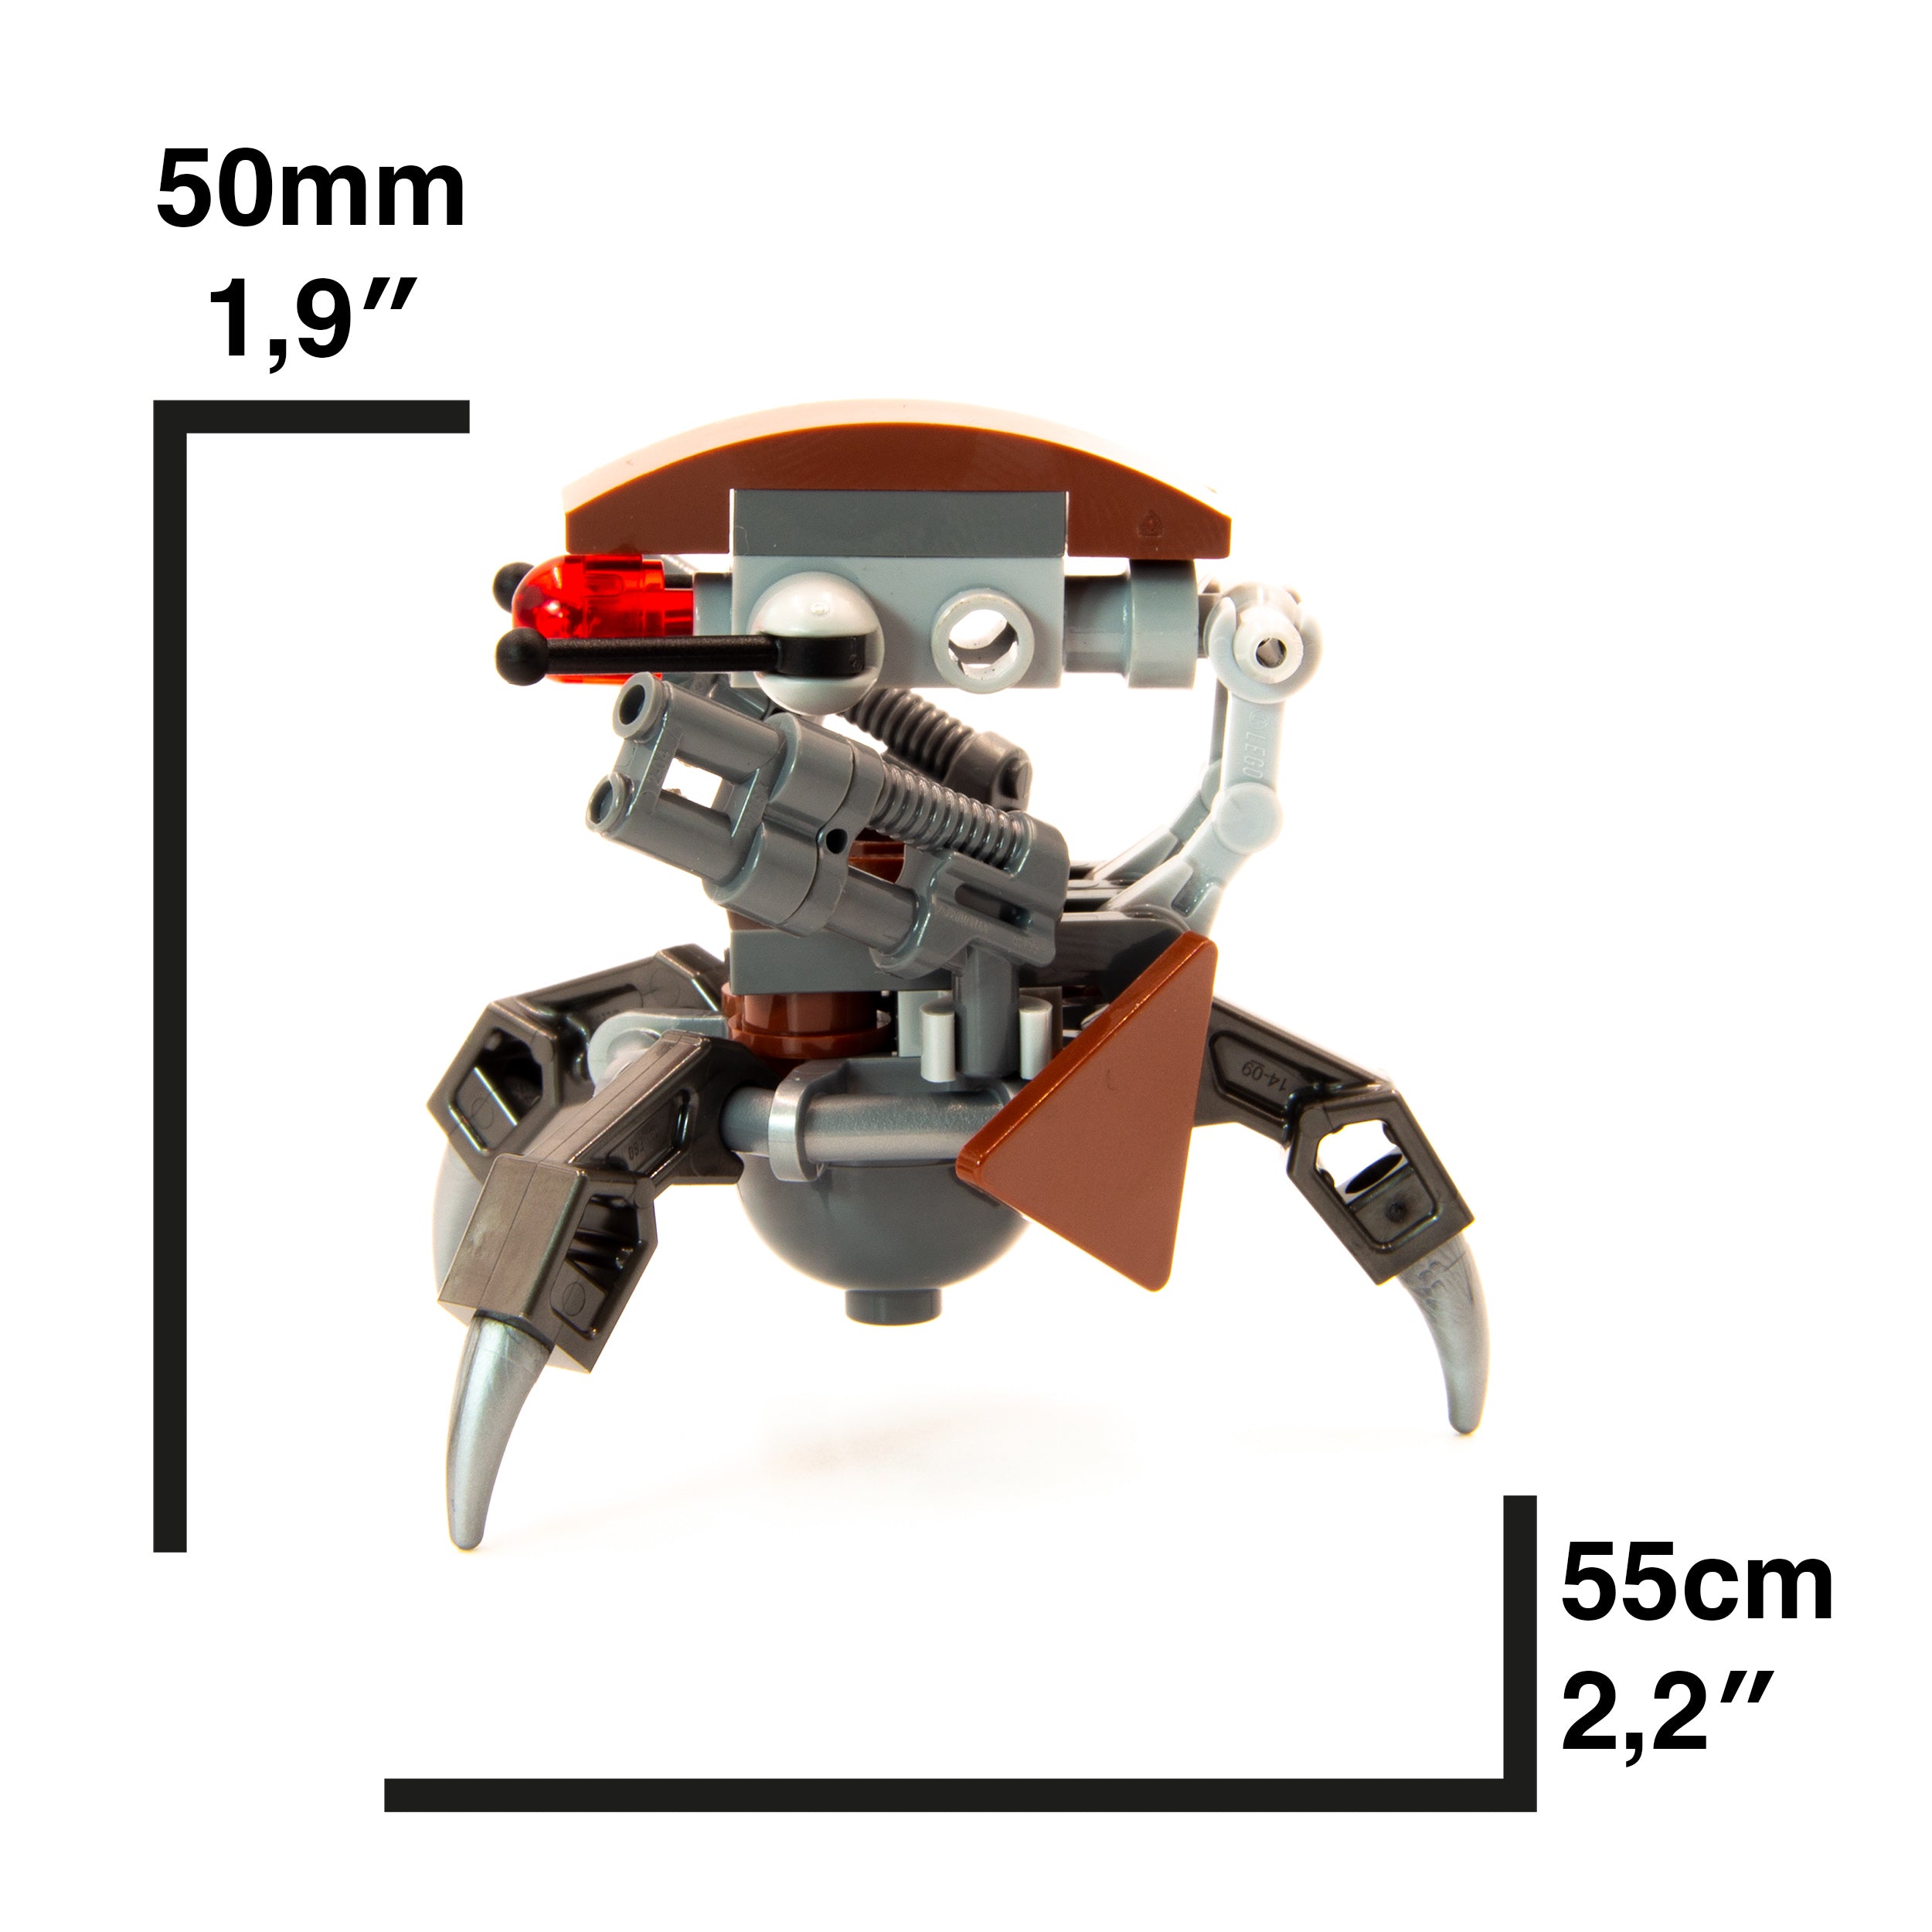 LEGO Star Wars Minifigure - Droideka (without stickers)